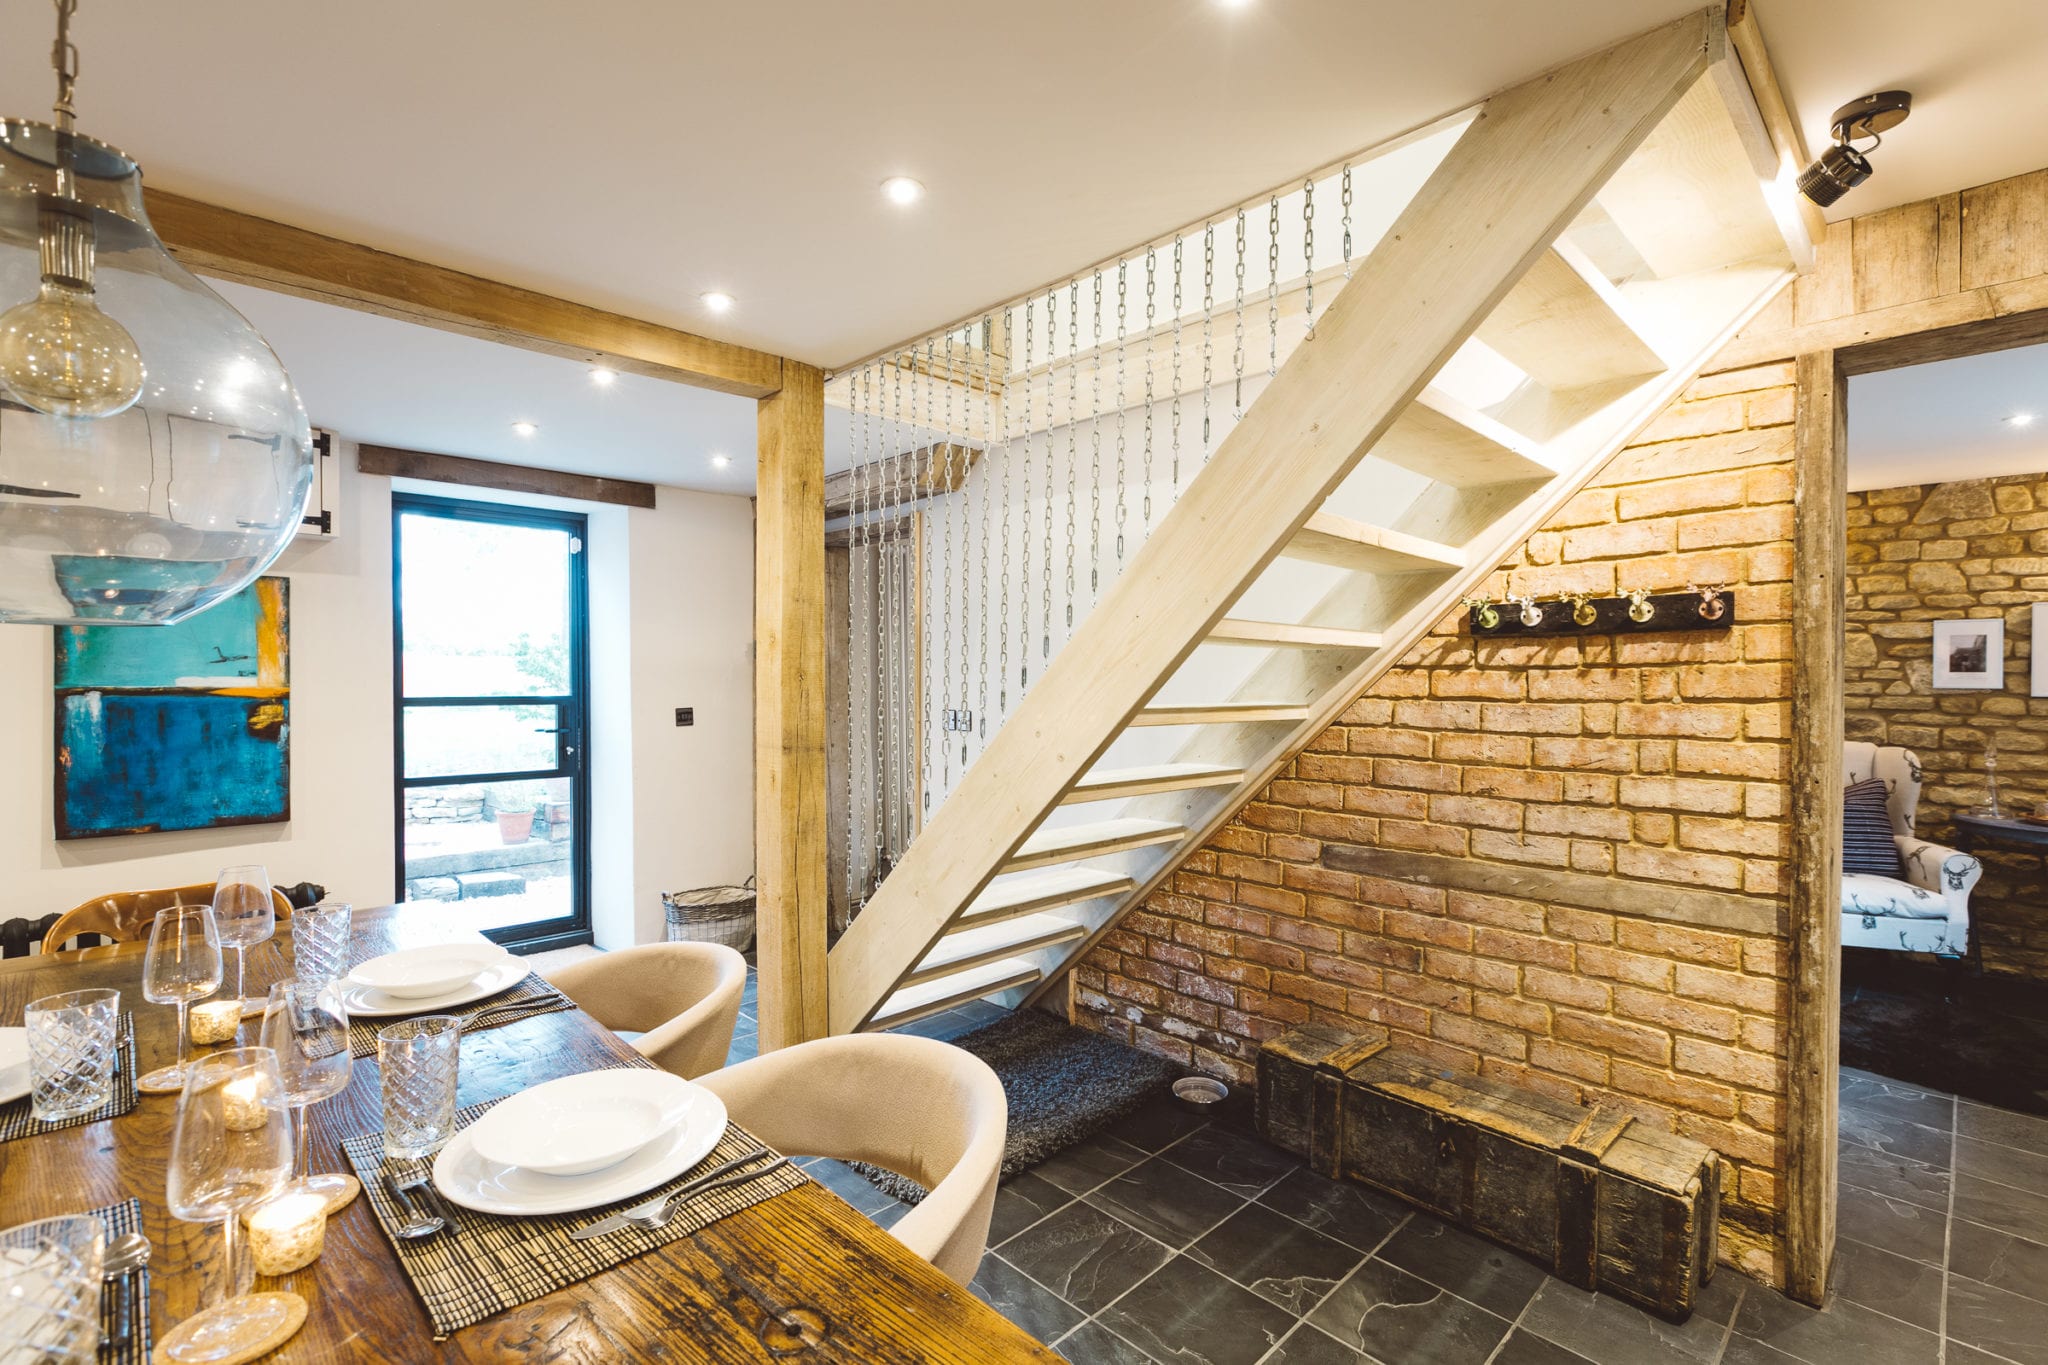 An open plan cottage interior with a floating staircase with chain rails